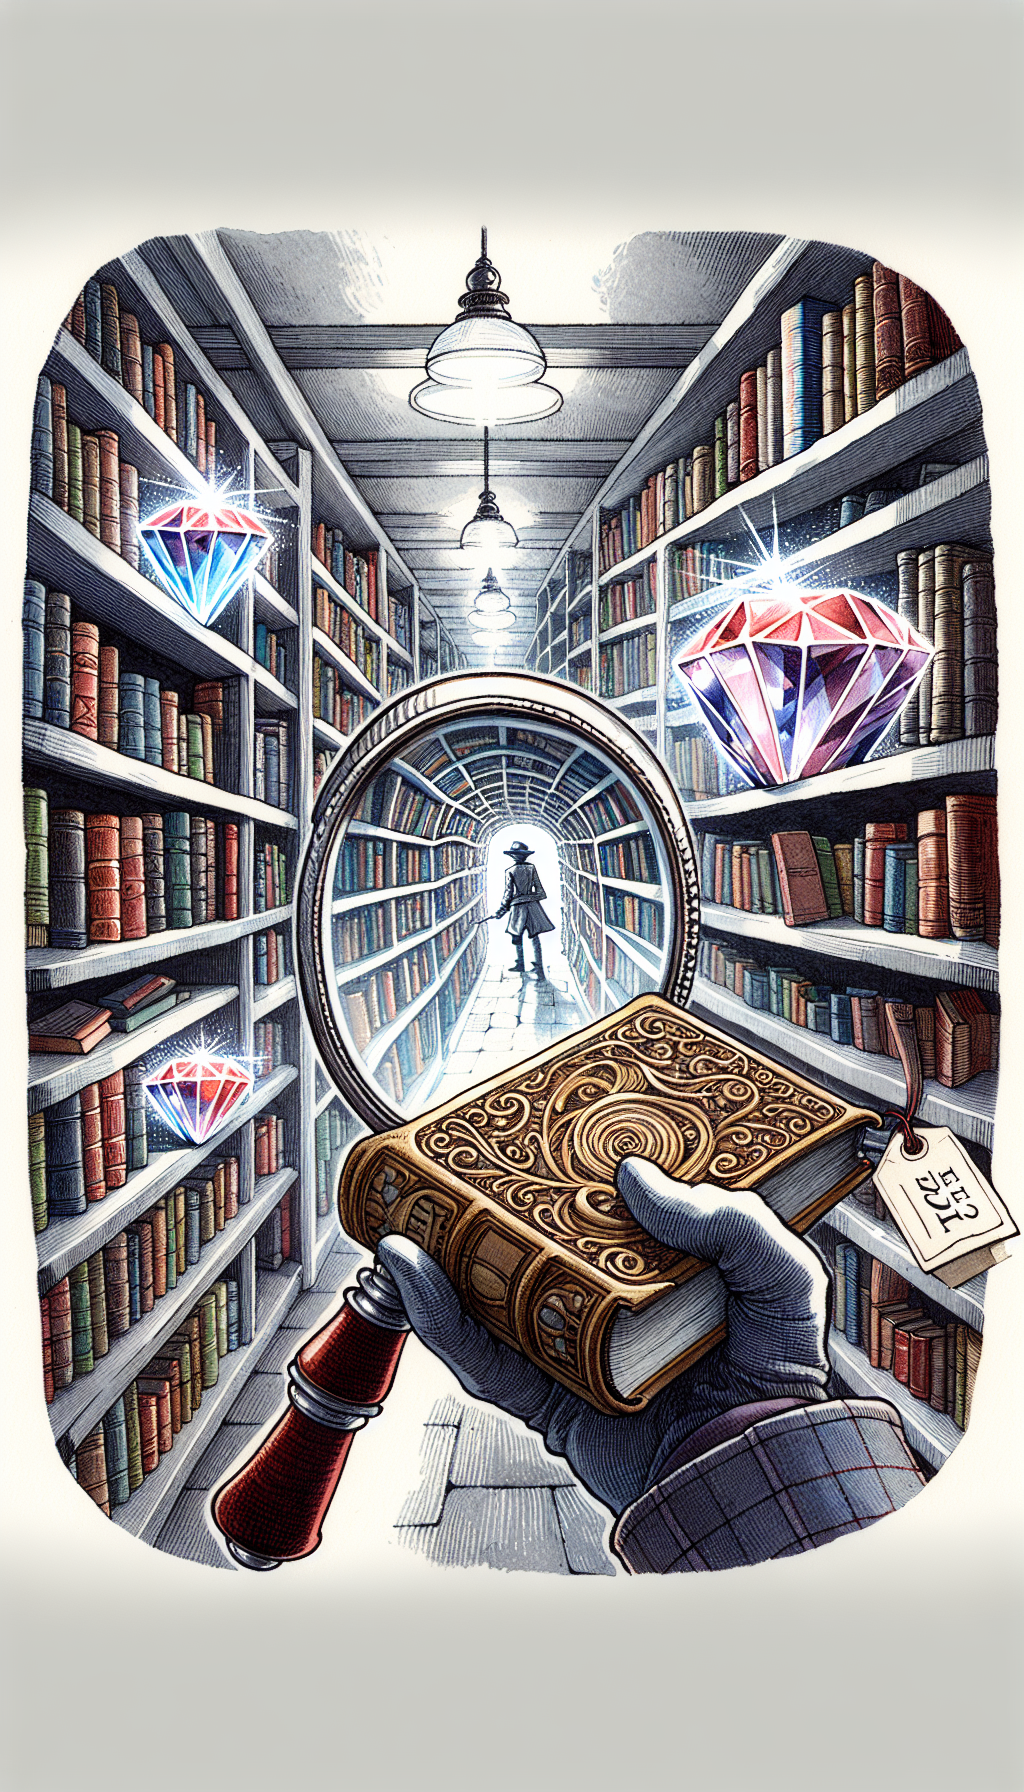 A whimsical illustration depicts a vintage magnifying glass peering into a bookshelf labyrinth, where books transform into sparkling gemstones. Amidst the shelves, a character dressed as an explorer holds an antique book with a price tag reading 'Free', hinting at undiscovered value. Styles range from detailed ink hatching on the magnifying glass to watercolor washes creating the gem-book hybrids.